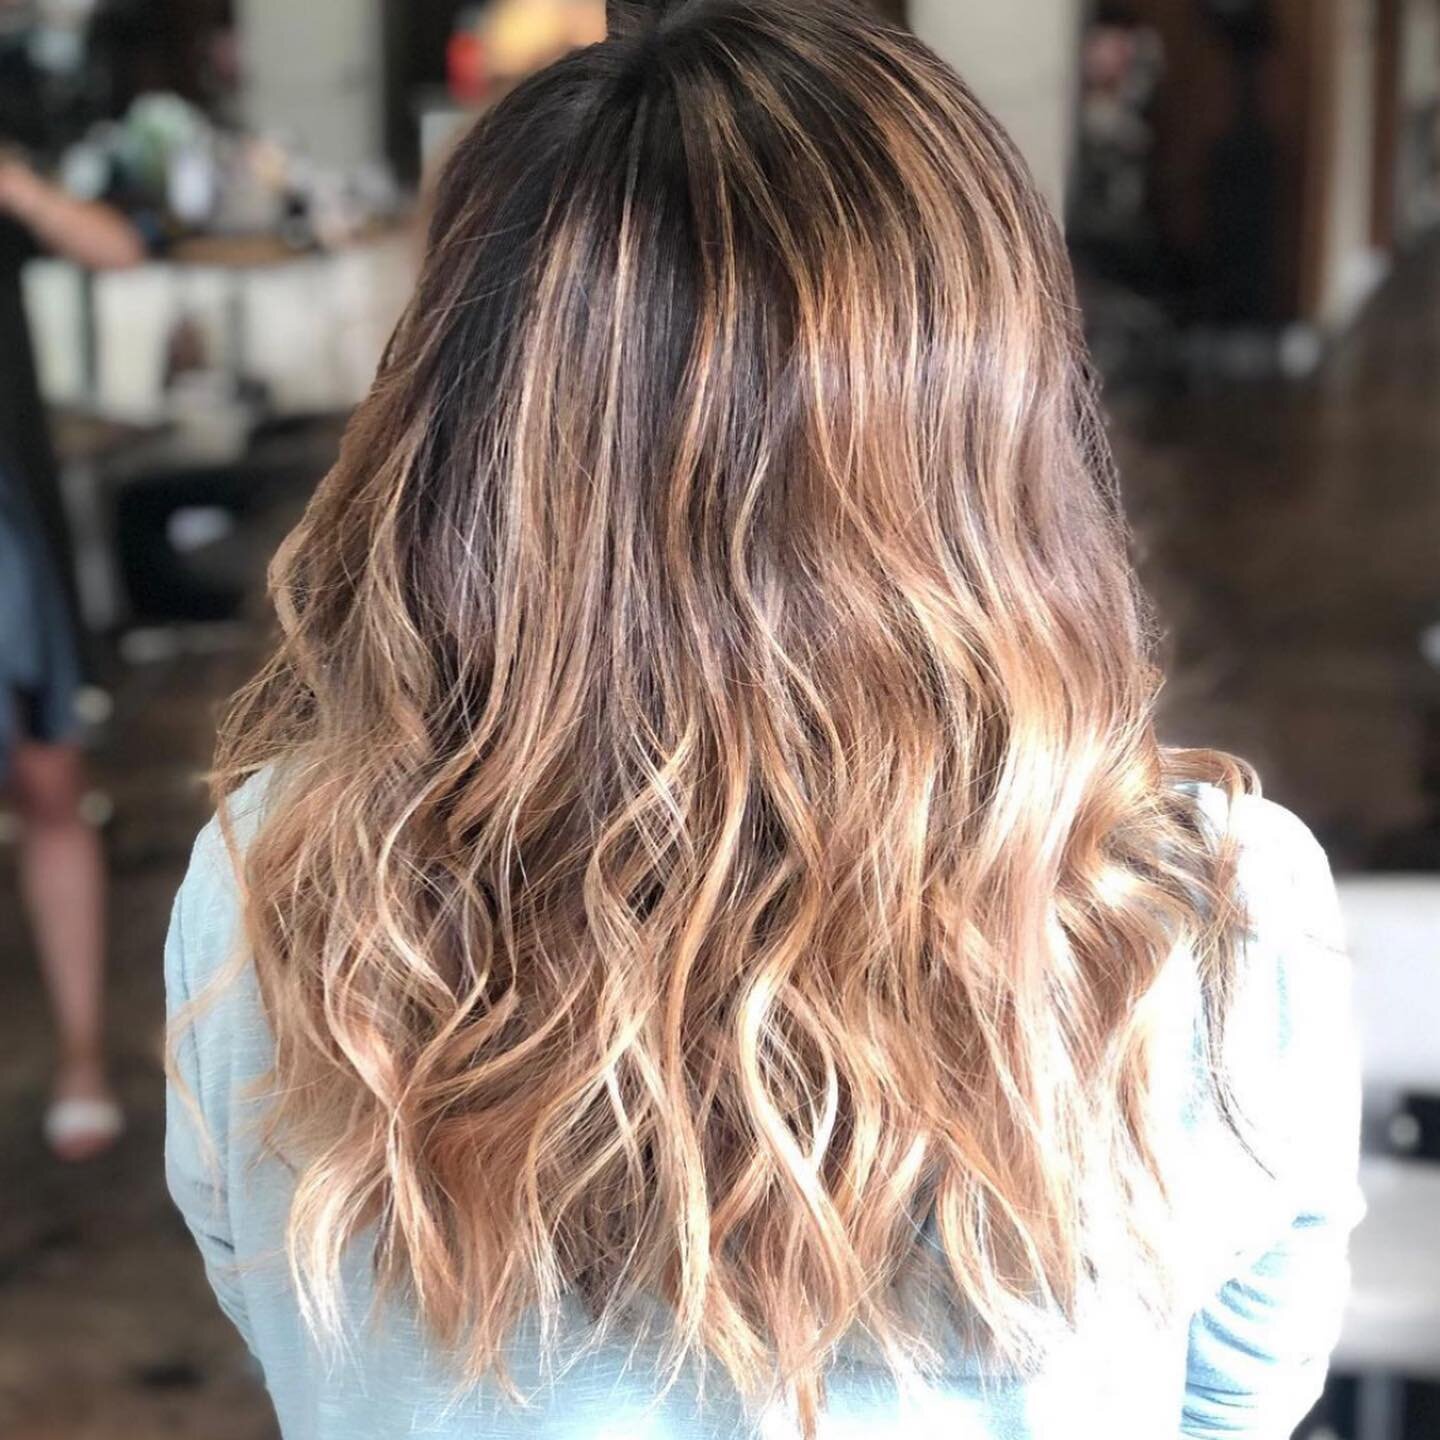 🔥➡️➡️ Swipe all the way for the before. Some brightening blended balayage highlights #welovebalayage #goldwellapprovedus #kmsapprovedus